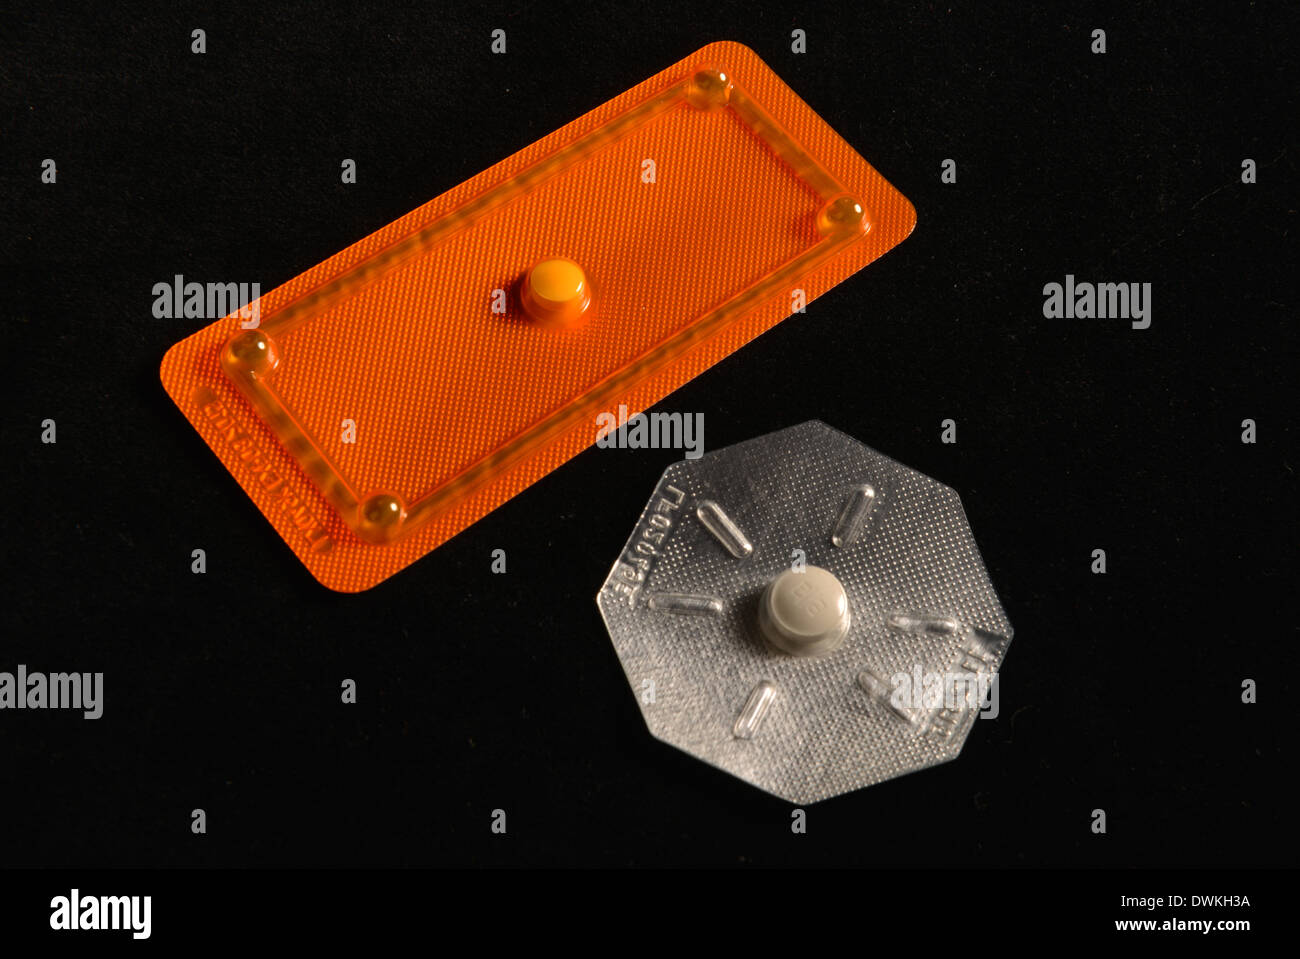 Symbol photo of the morning-after pill. These preparations are partly controversial in the Catholic Church for various religious reasons. Stock Photo